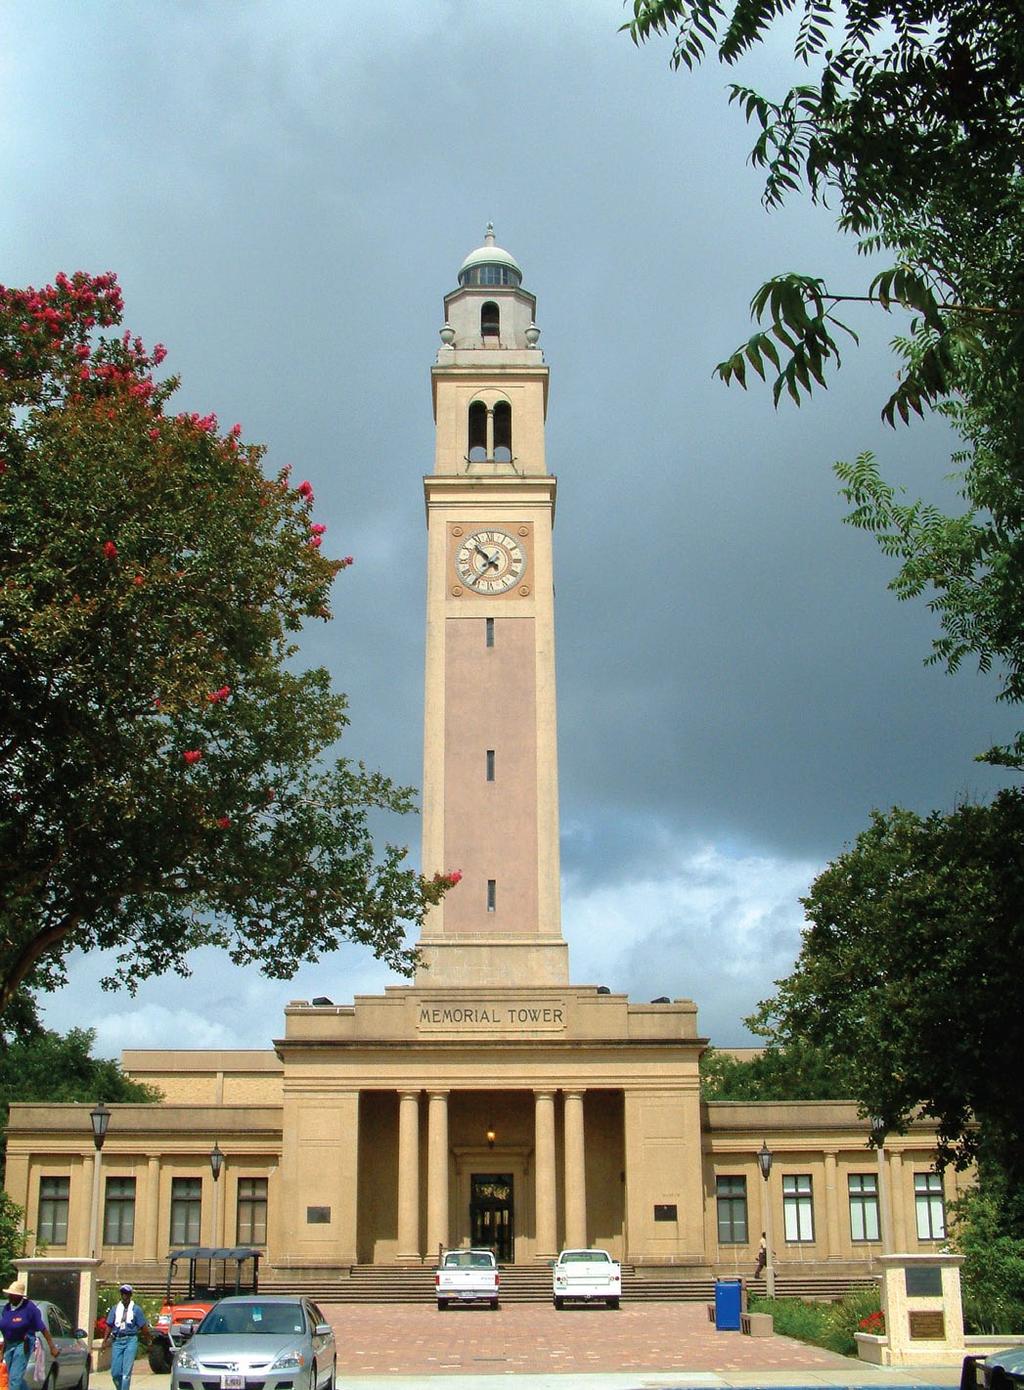 The 175-foot tall campanile, or bell tower, was one of the first structures completed on the LSU